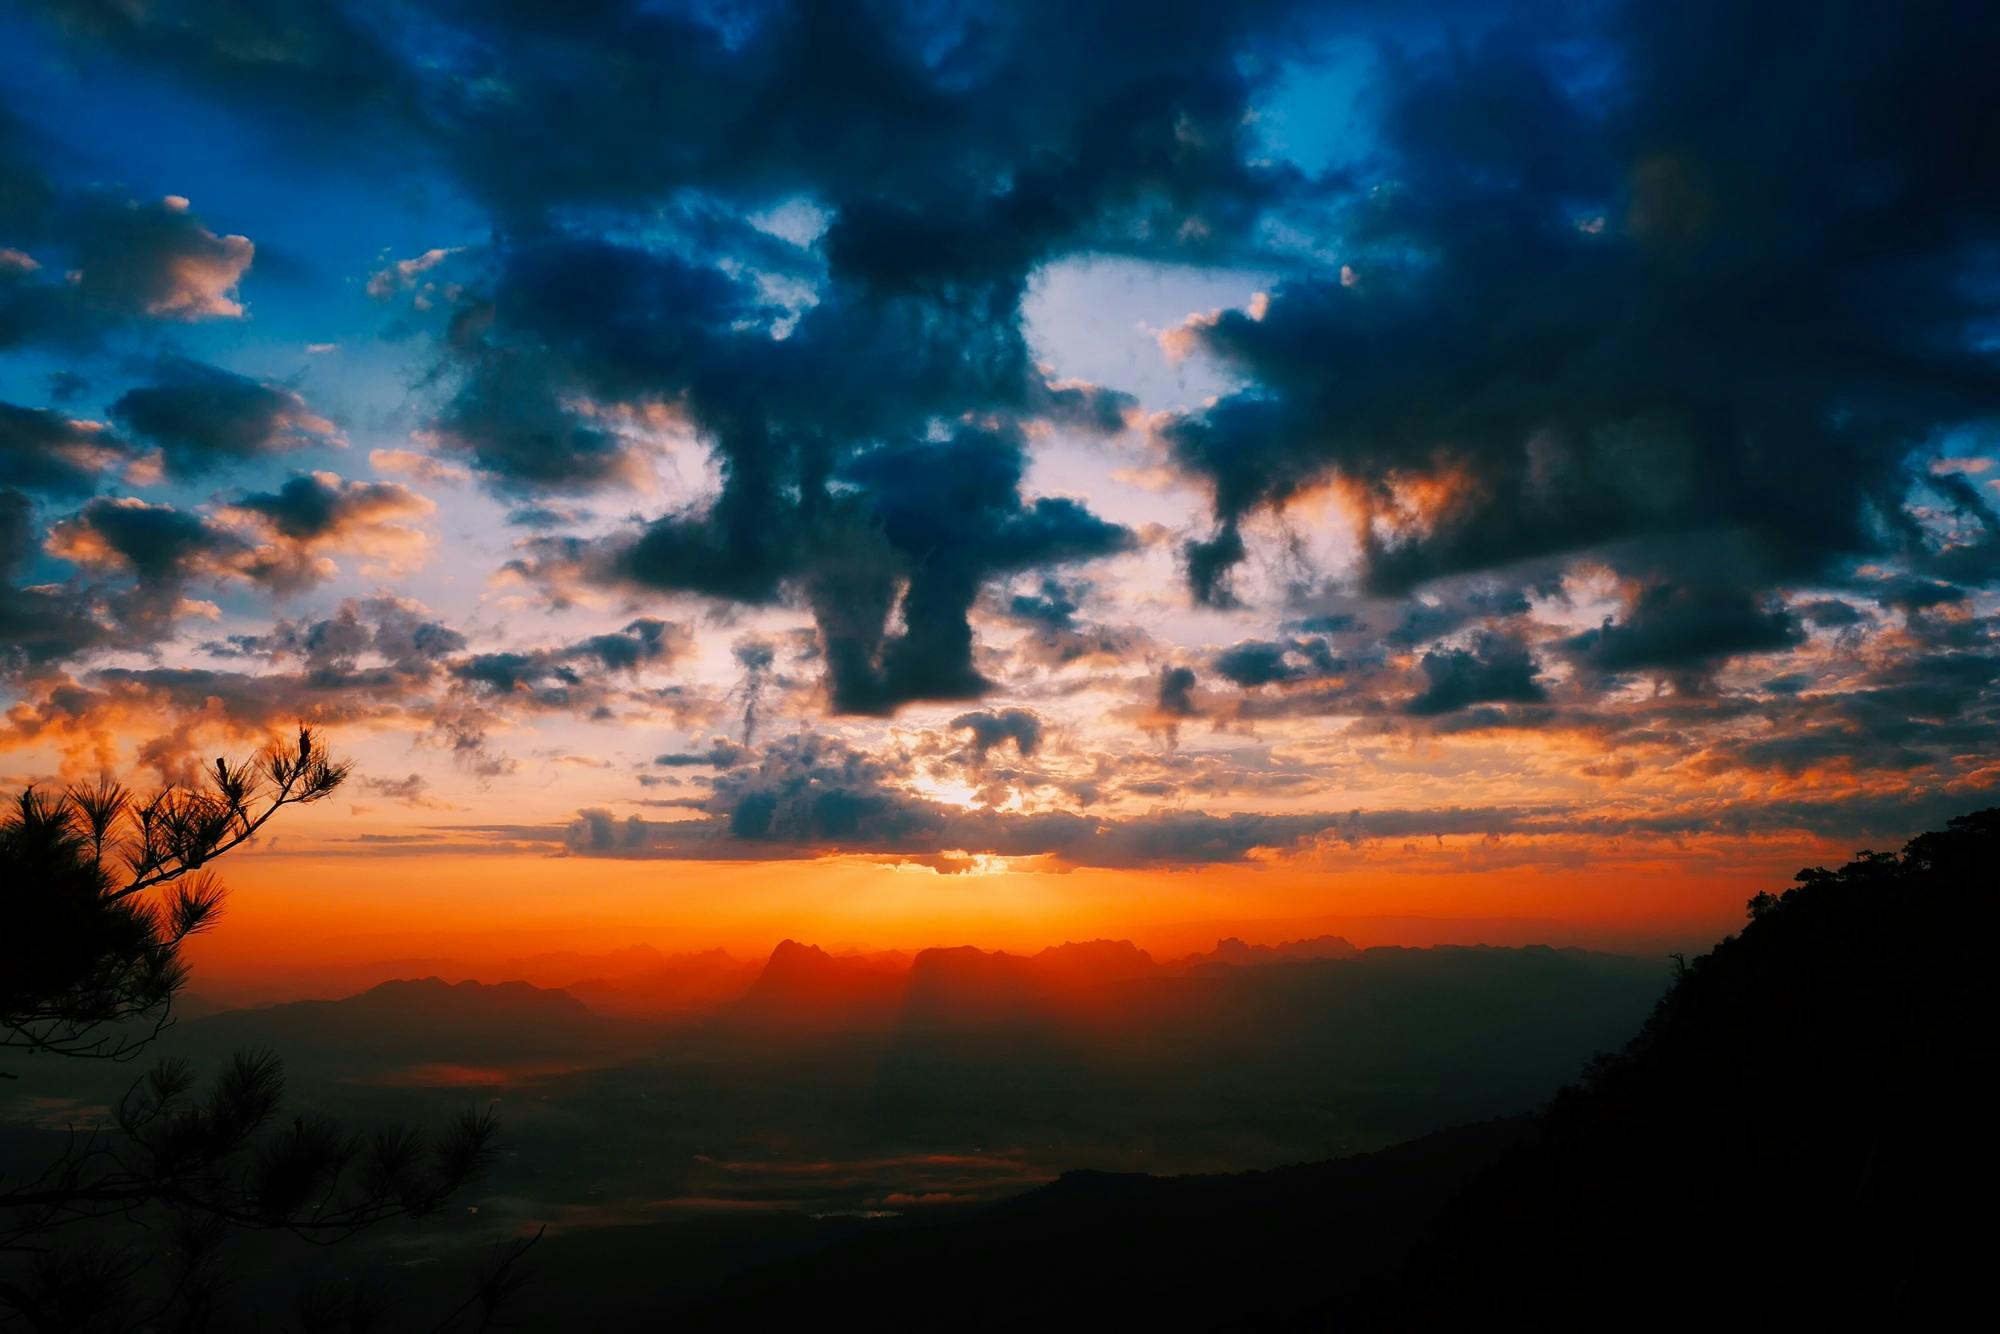 a view of a sunset from the top of a mountain, pexels contest winner, romanticism, orange and blue colors, instagram post, clouds around, multiple stories